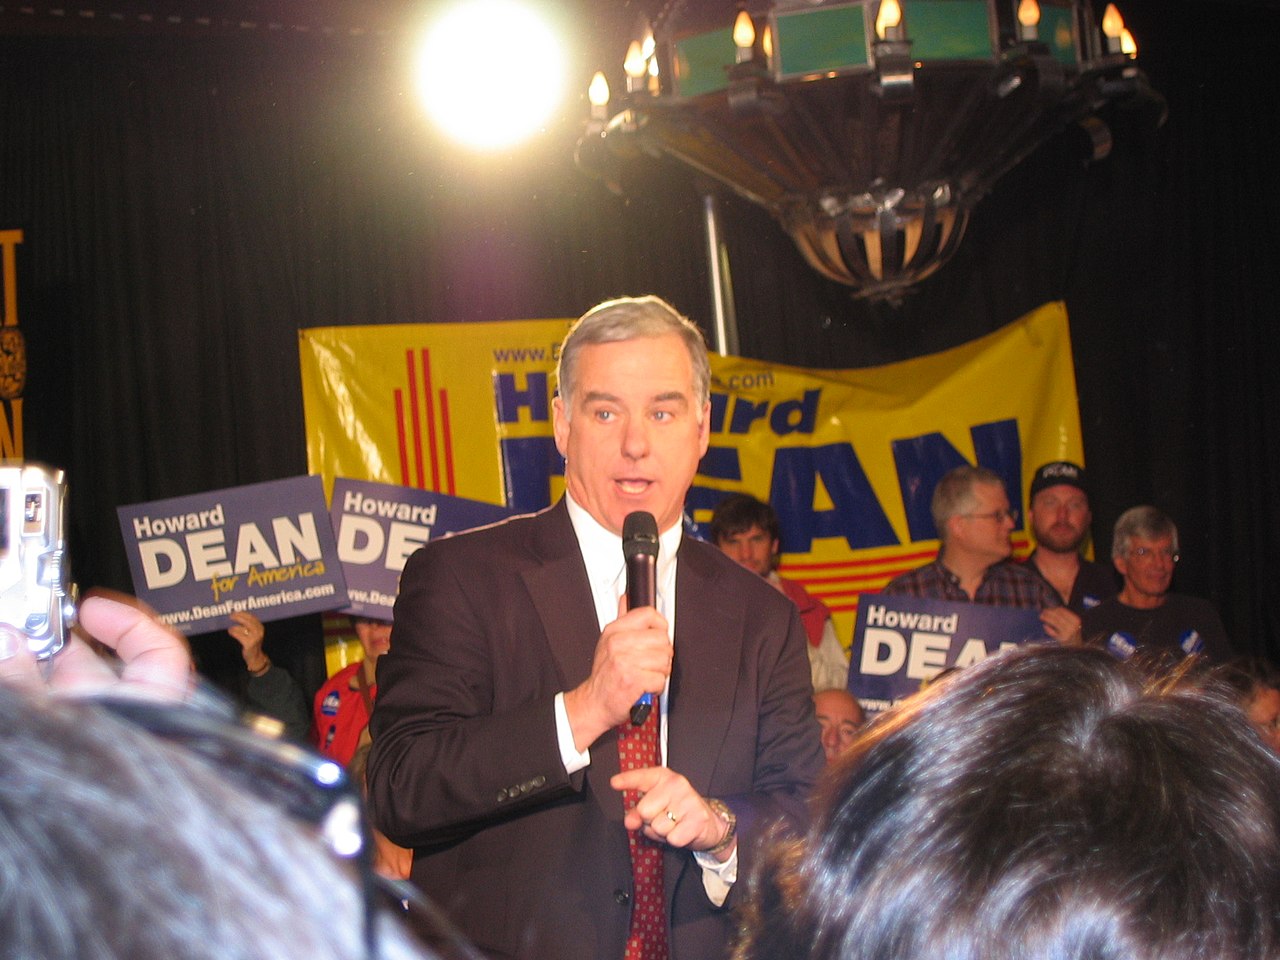 Howard Dean holding mic and talking at a rally